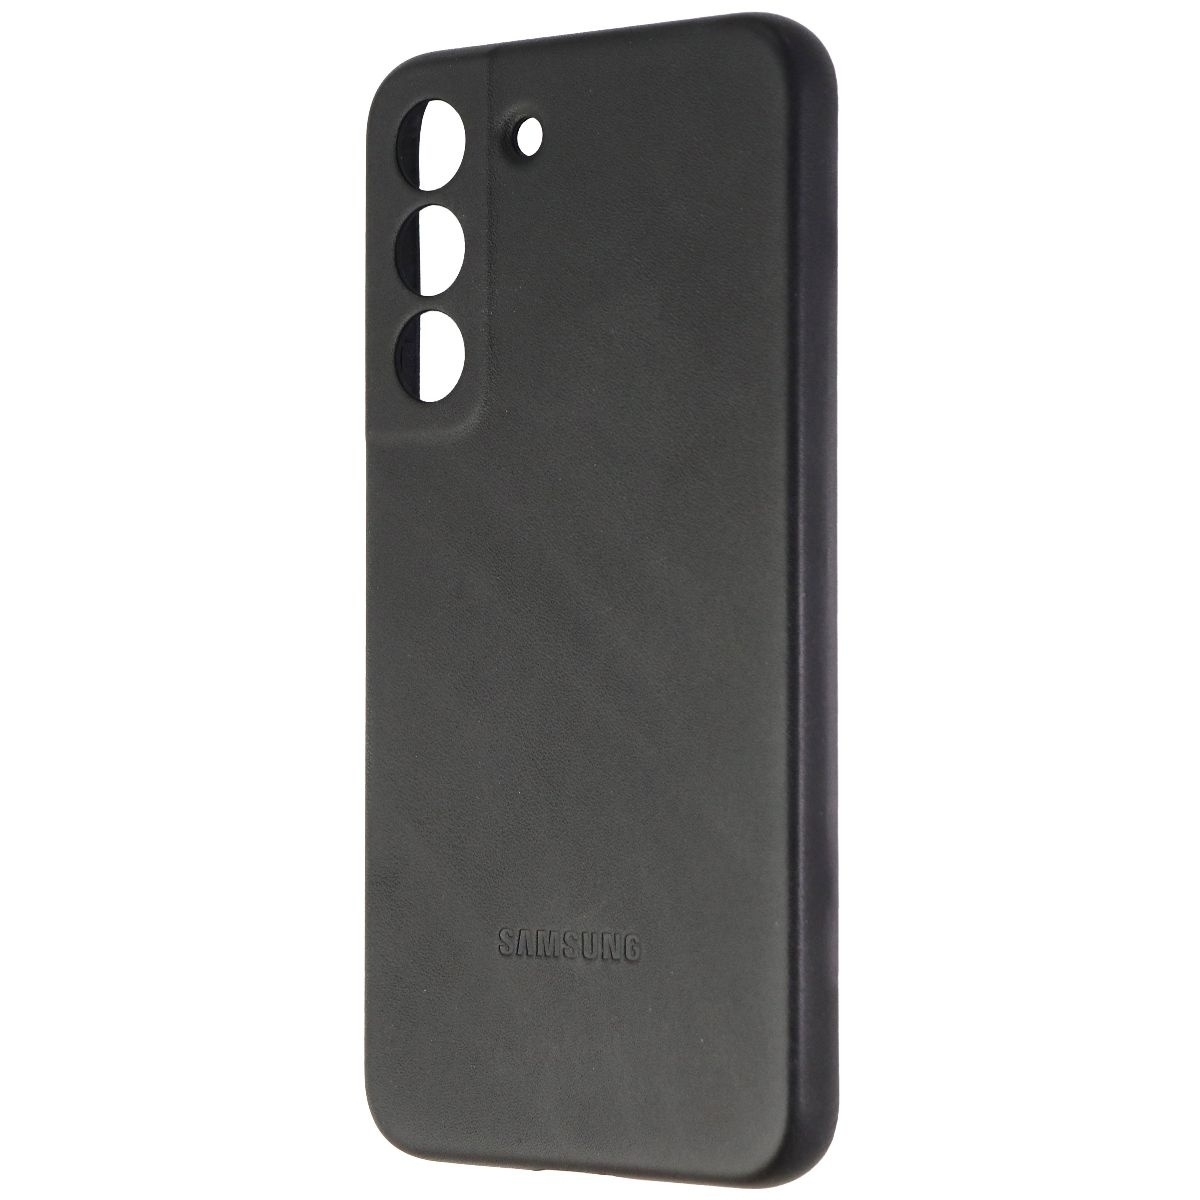 Samsung Leather Cover Case For Galaxy S22 - Black (EF-VS901LBEVZW)